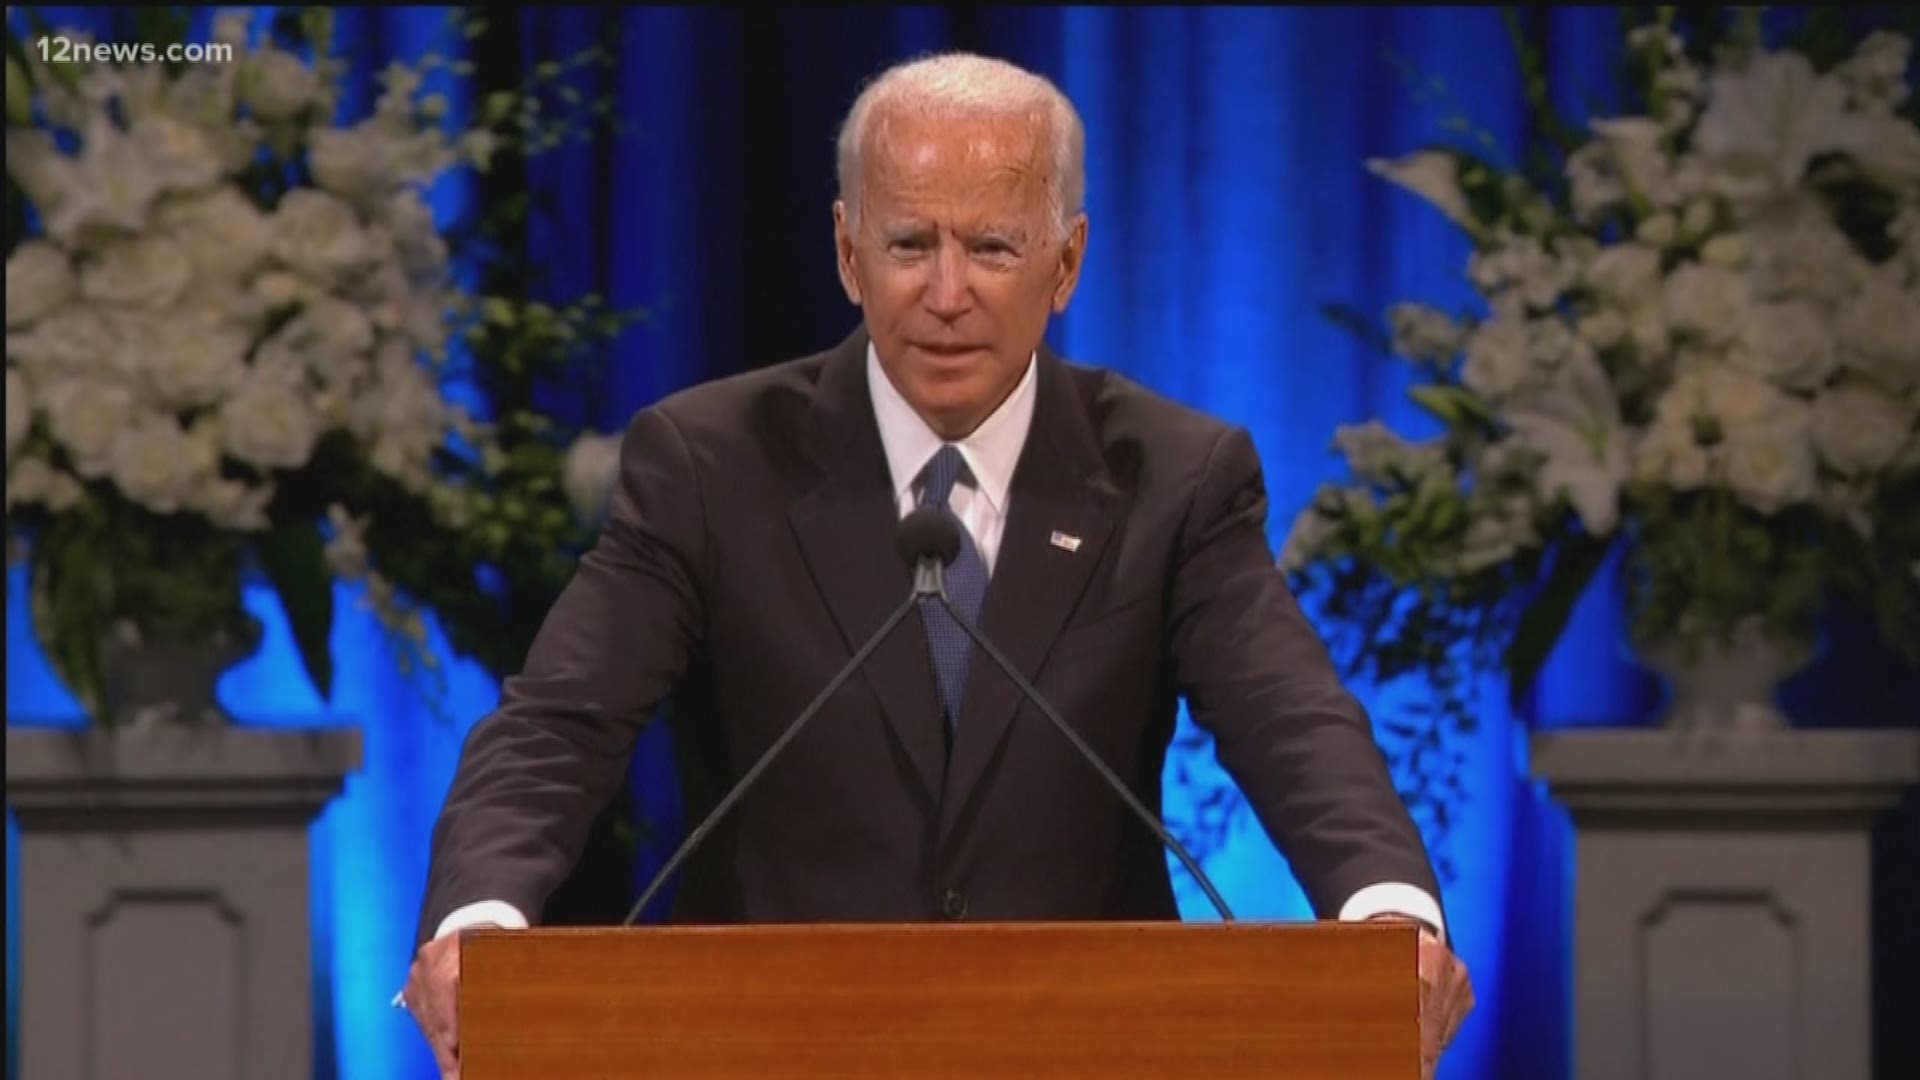 Joe Biden pays a humorous and emotional tribute to John McCain at his memorial service in Phoenix on Thursday.